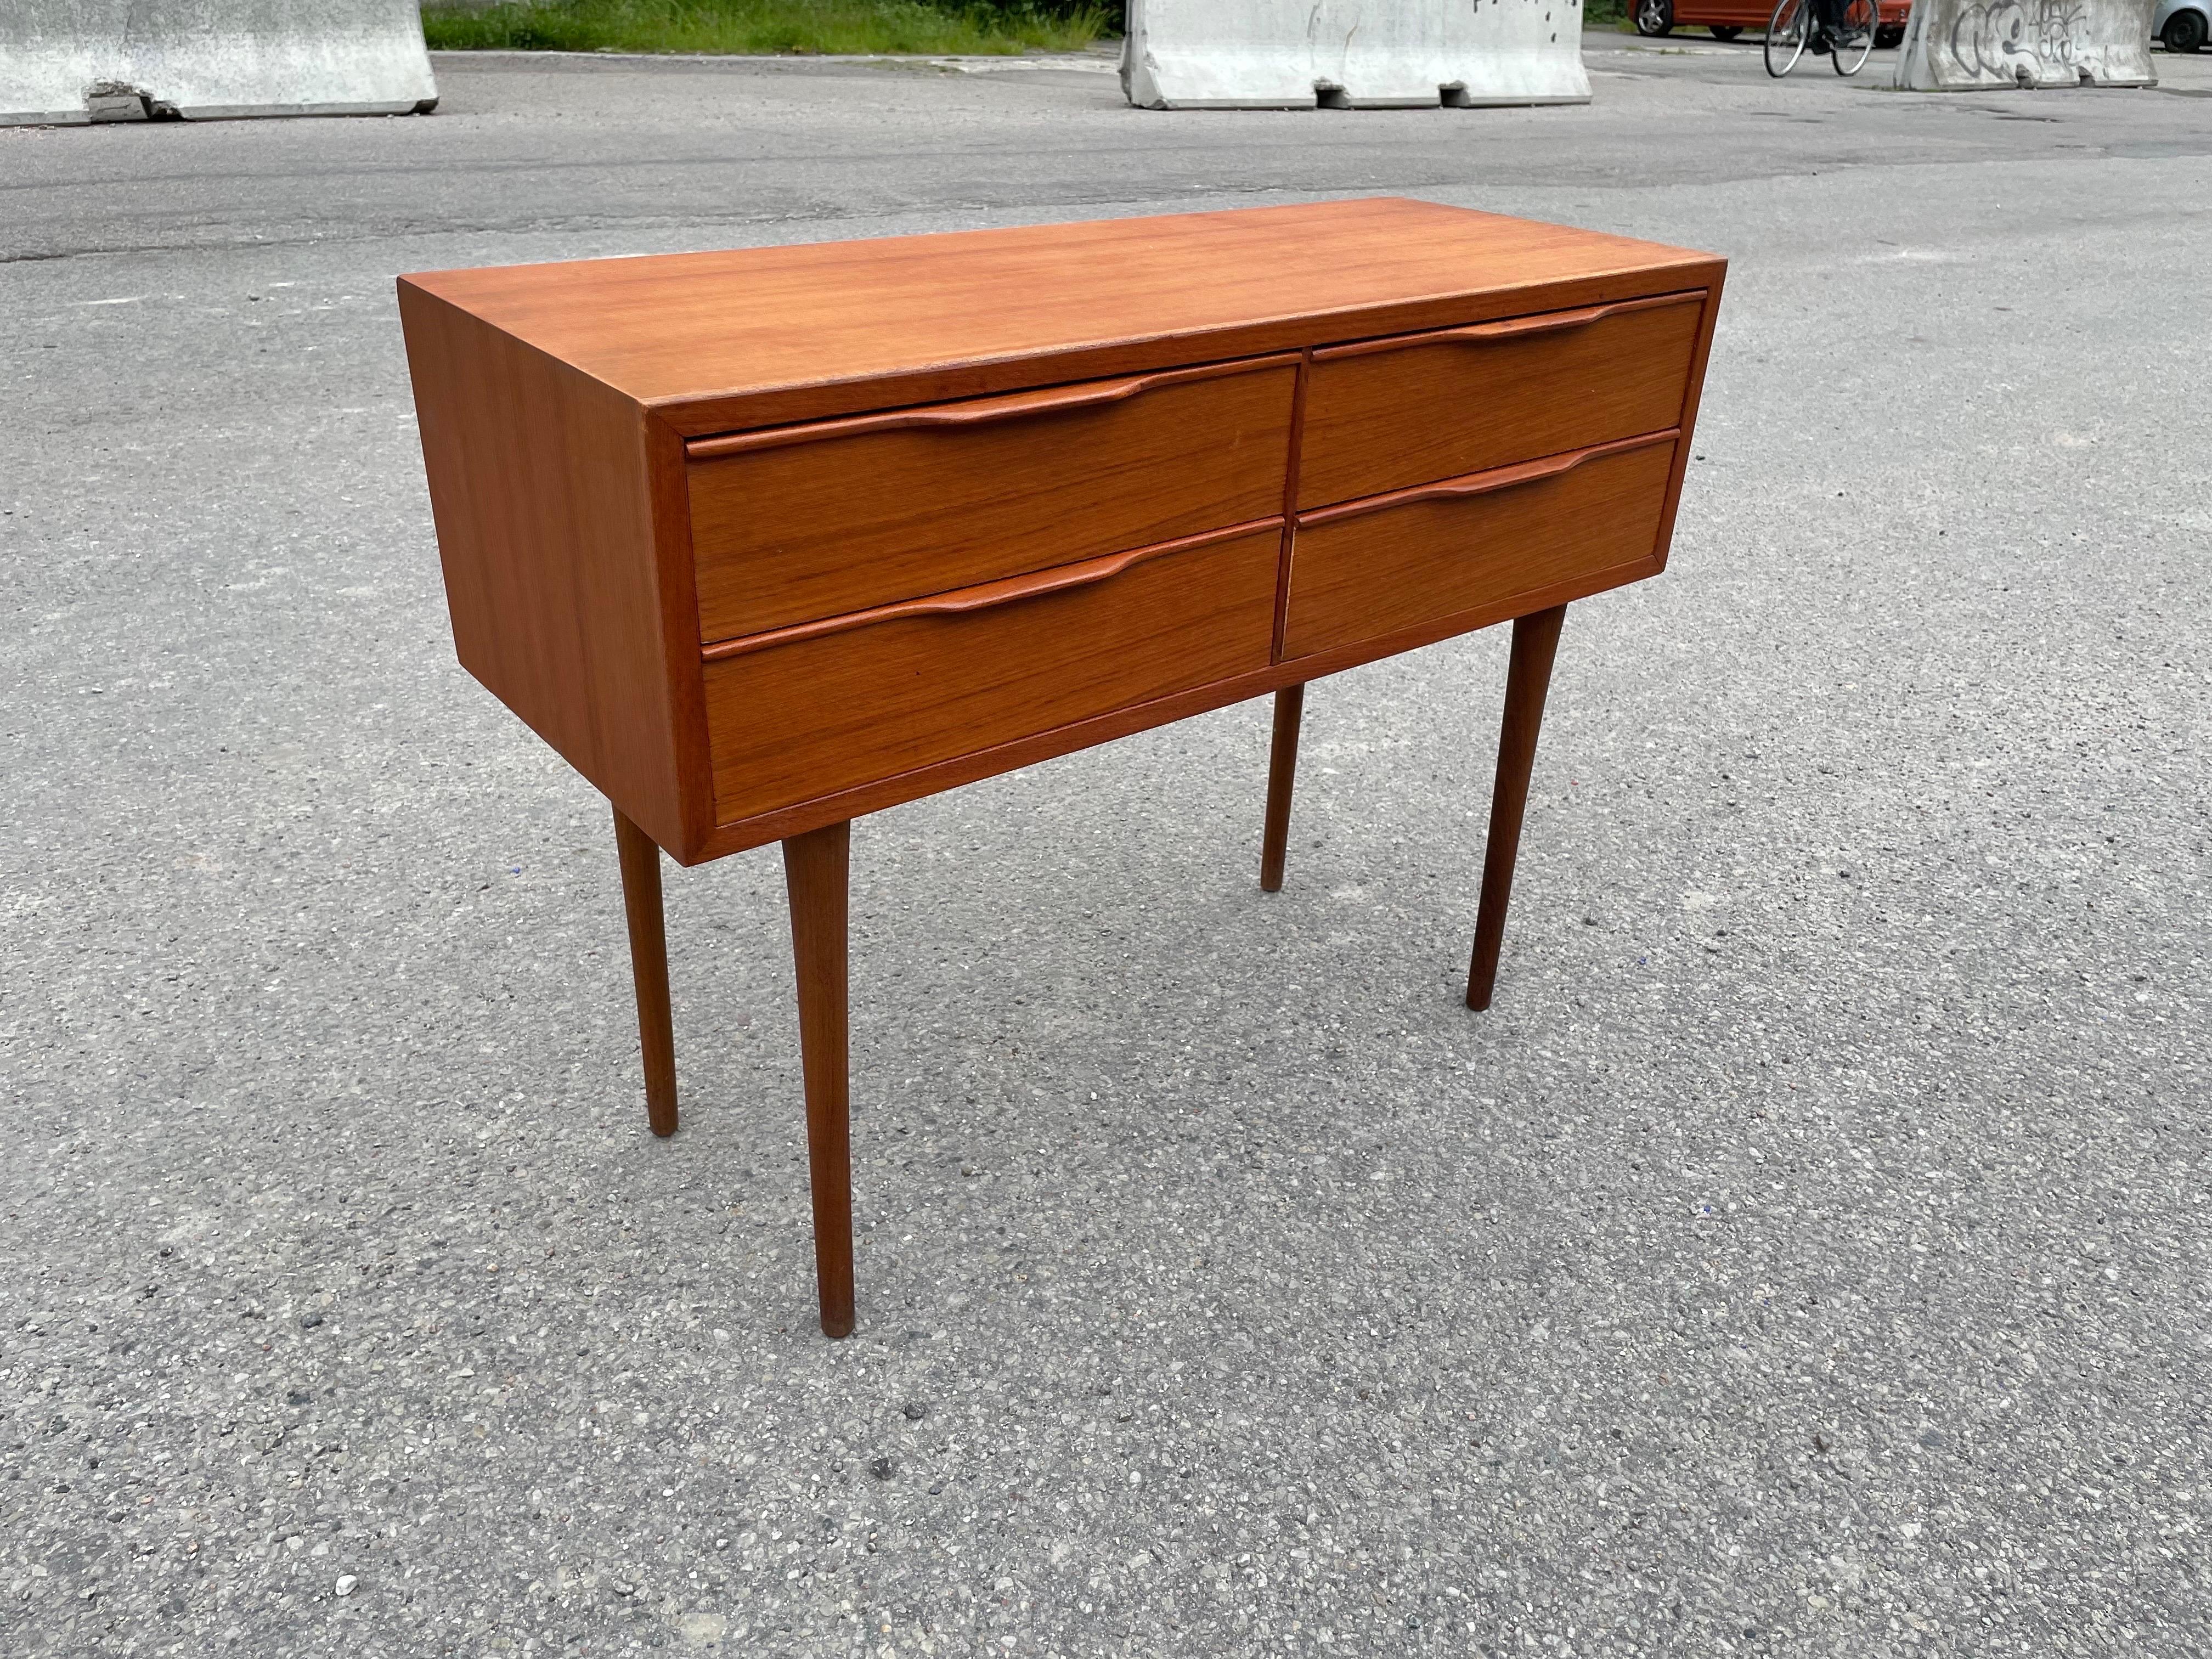 The elegant Mid-Century Modern dresser by Kai Kristiansen is a rarity of his design. The elegant slim legs gives it a beautiful fragile but still solid expression of excellent craftsmanship. A 1960’s dresser that blends in anywhere.